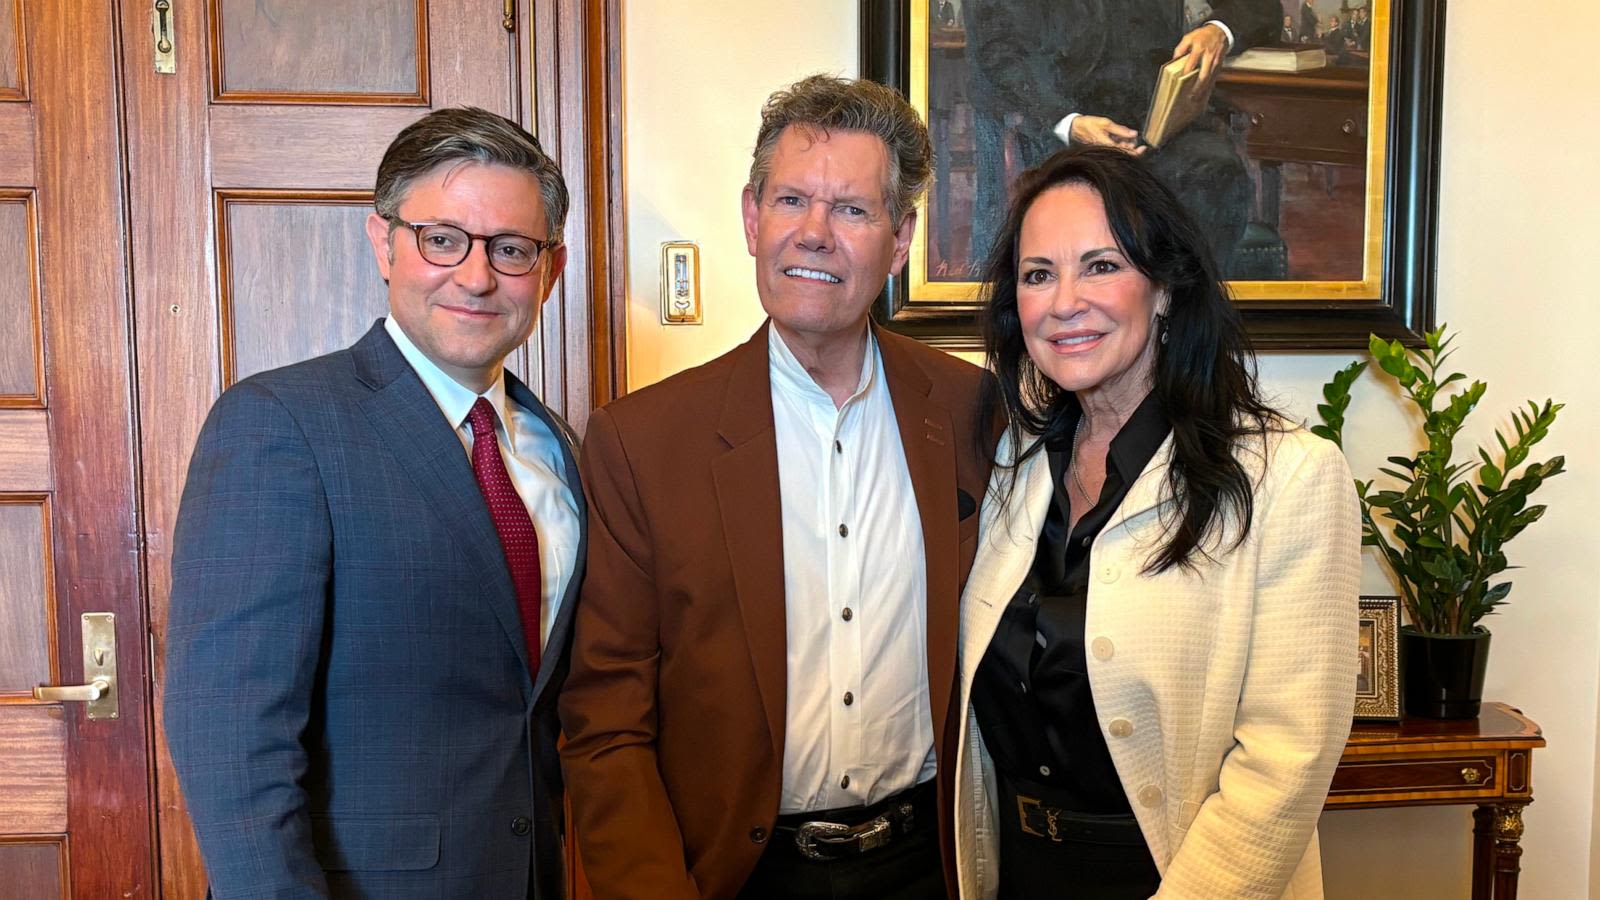 Randy Travis, wife Mary talk country singer's AI music comeback, American Music Fairness Act